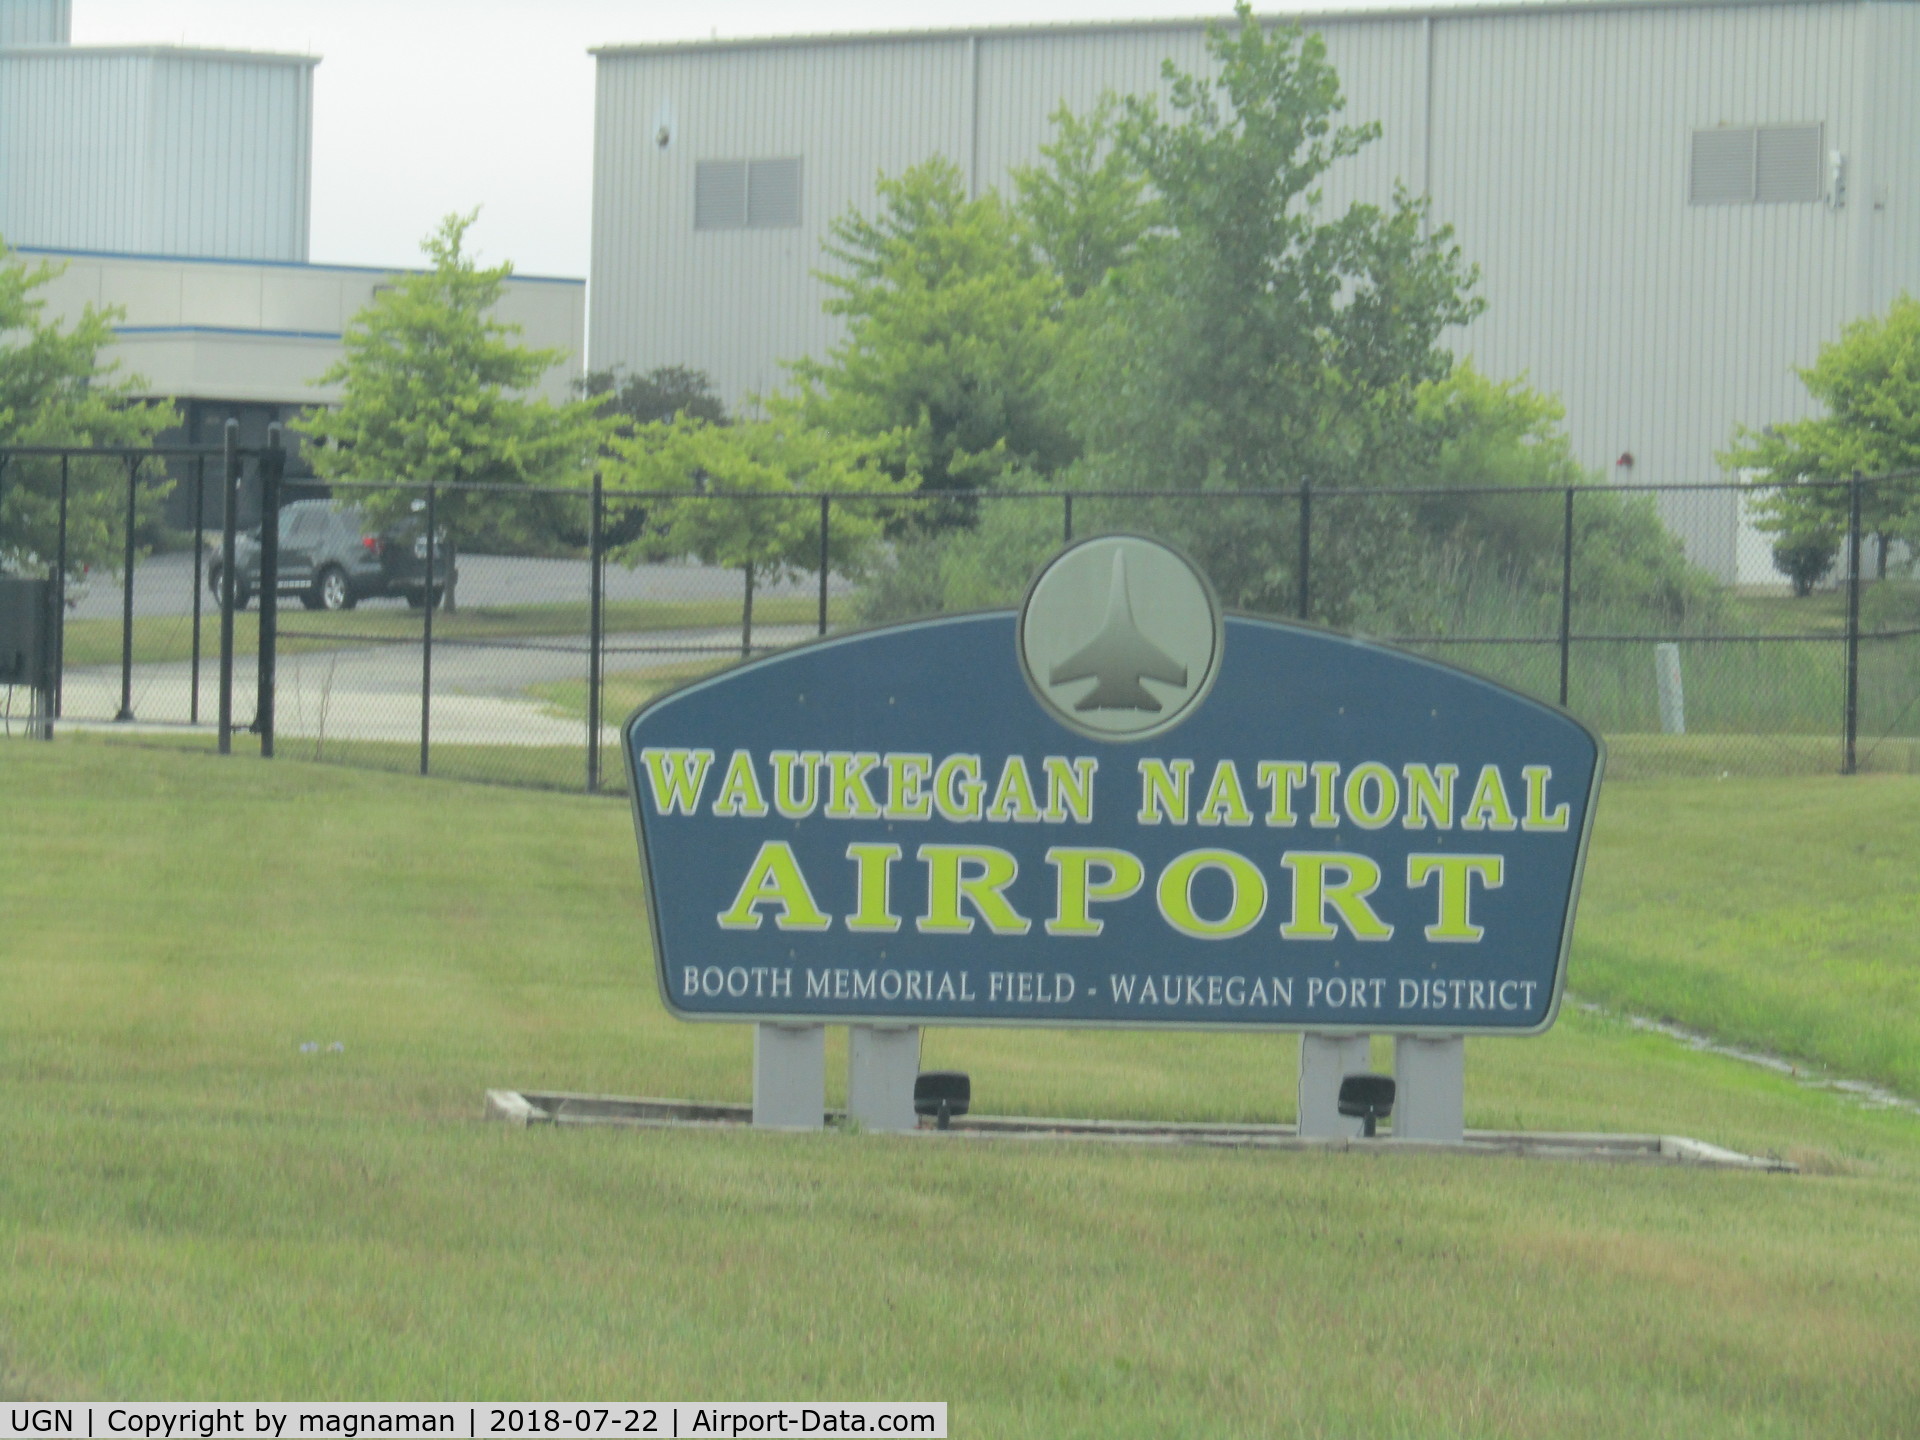 Waukegan Regional Airport (UGN) - entry sing on way into airport